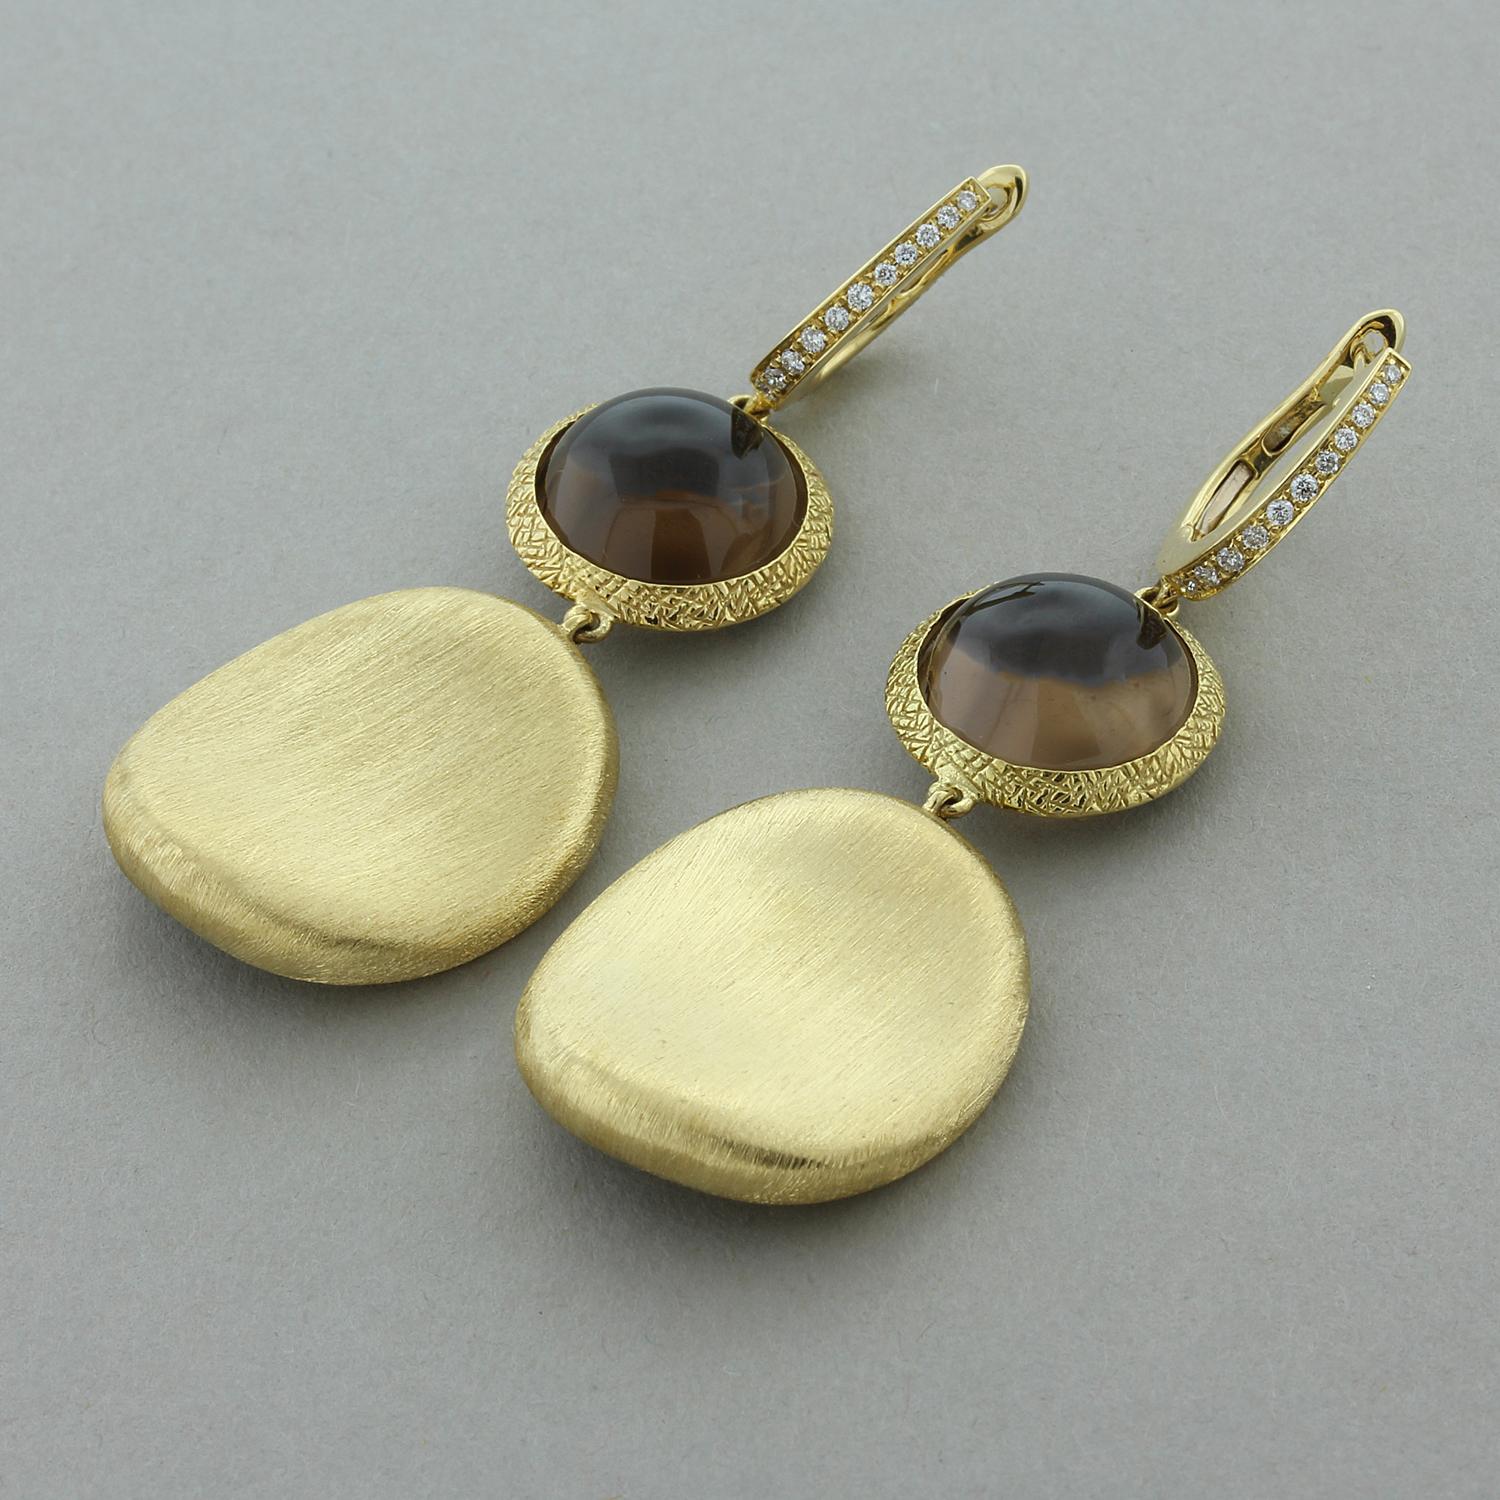 These sophisticated drop earrings feature 7.60 carats of round cabochon smoky quartz. The bezel set gemstones are dropped from 0.12 carats of round brilliant cut diamonds. Set in 18K yellow gold with a concave mesh and hammered gold finish, these